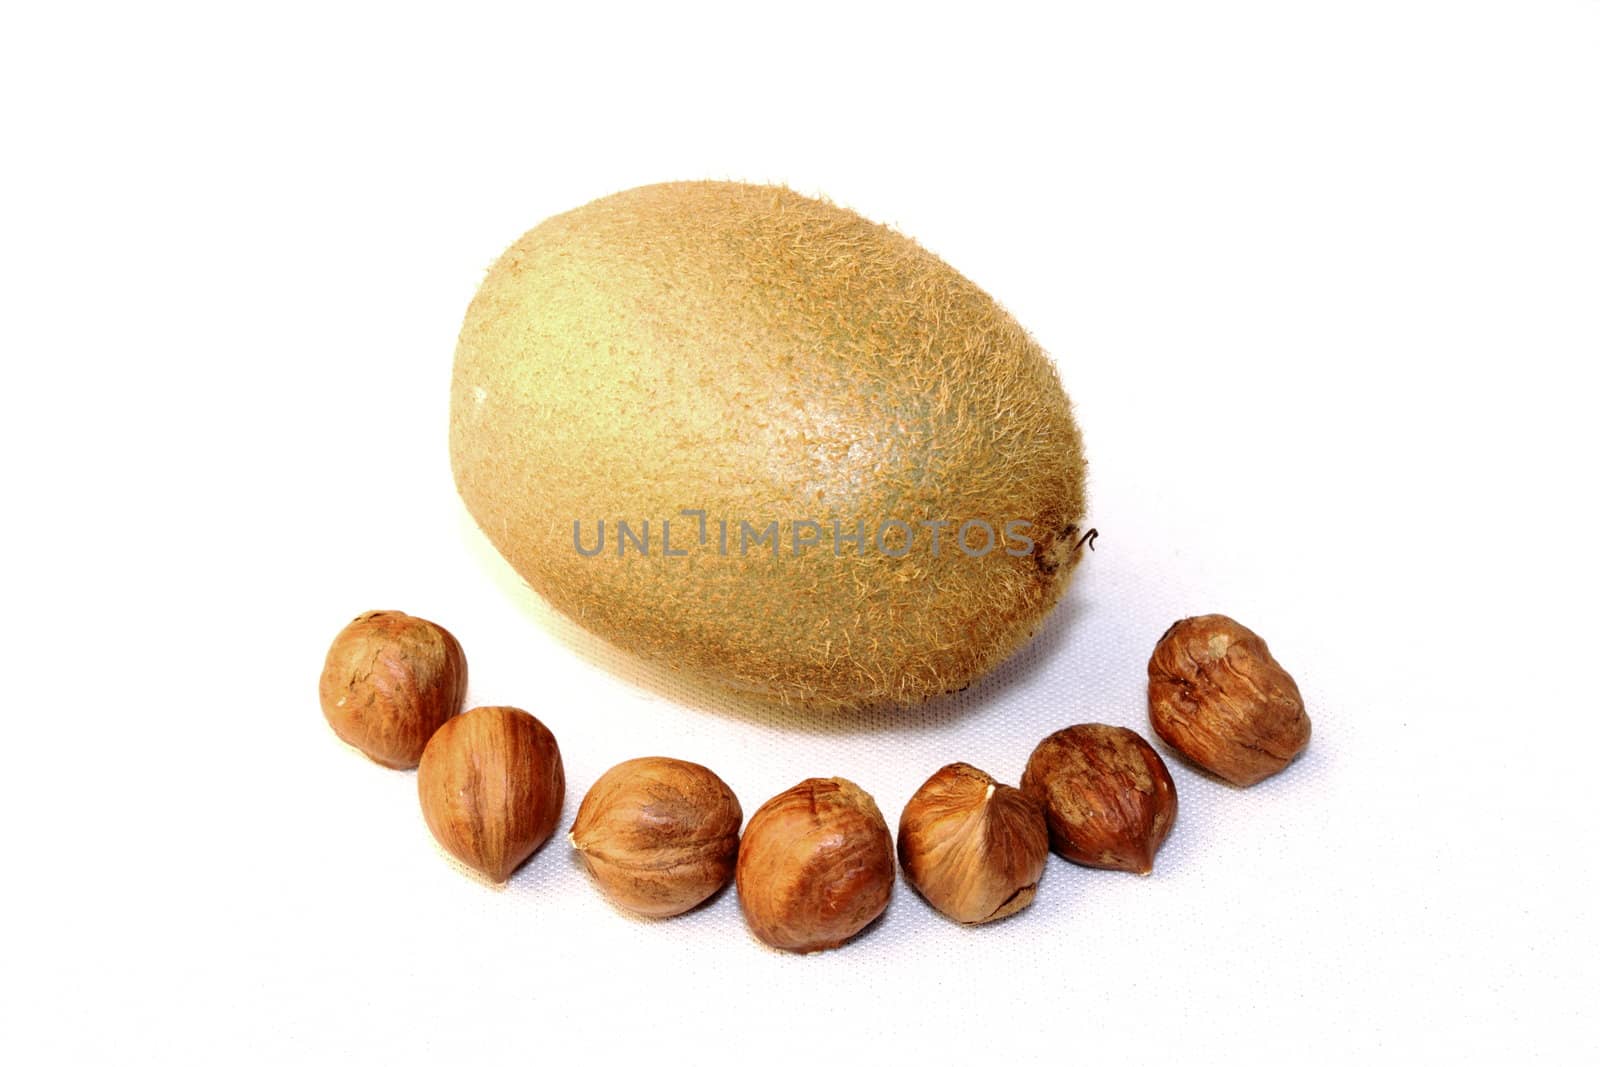 some hazelnuts are excelent to eat with a kiwi fruit